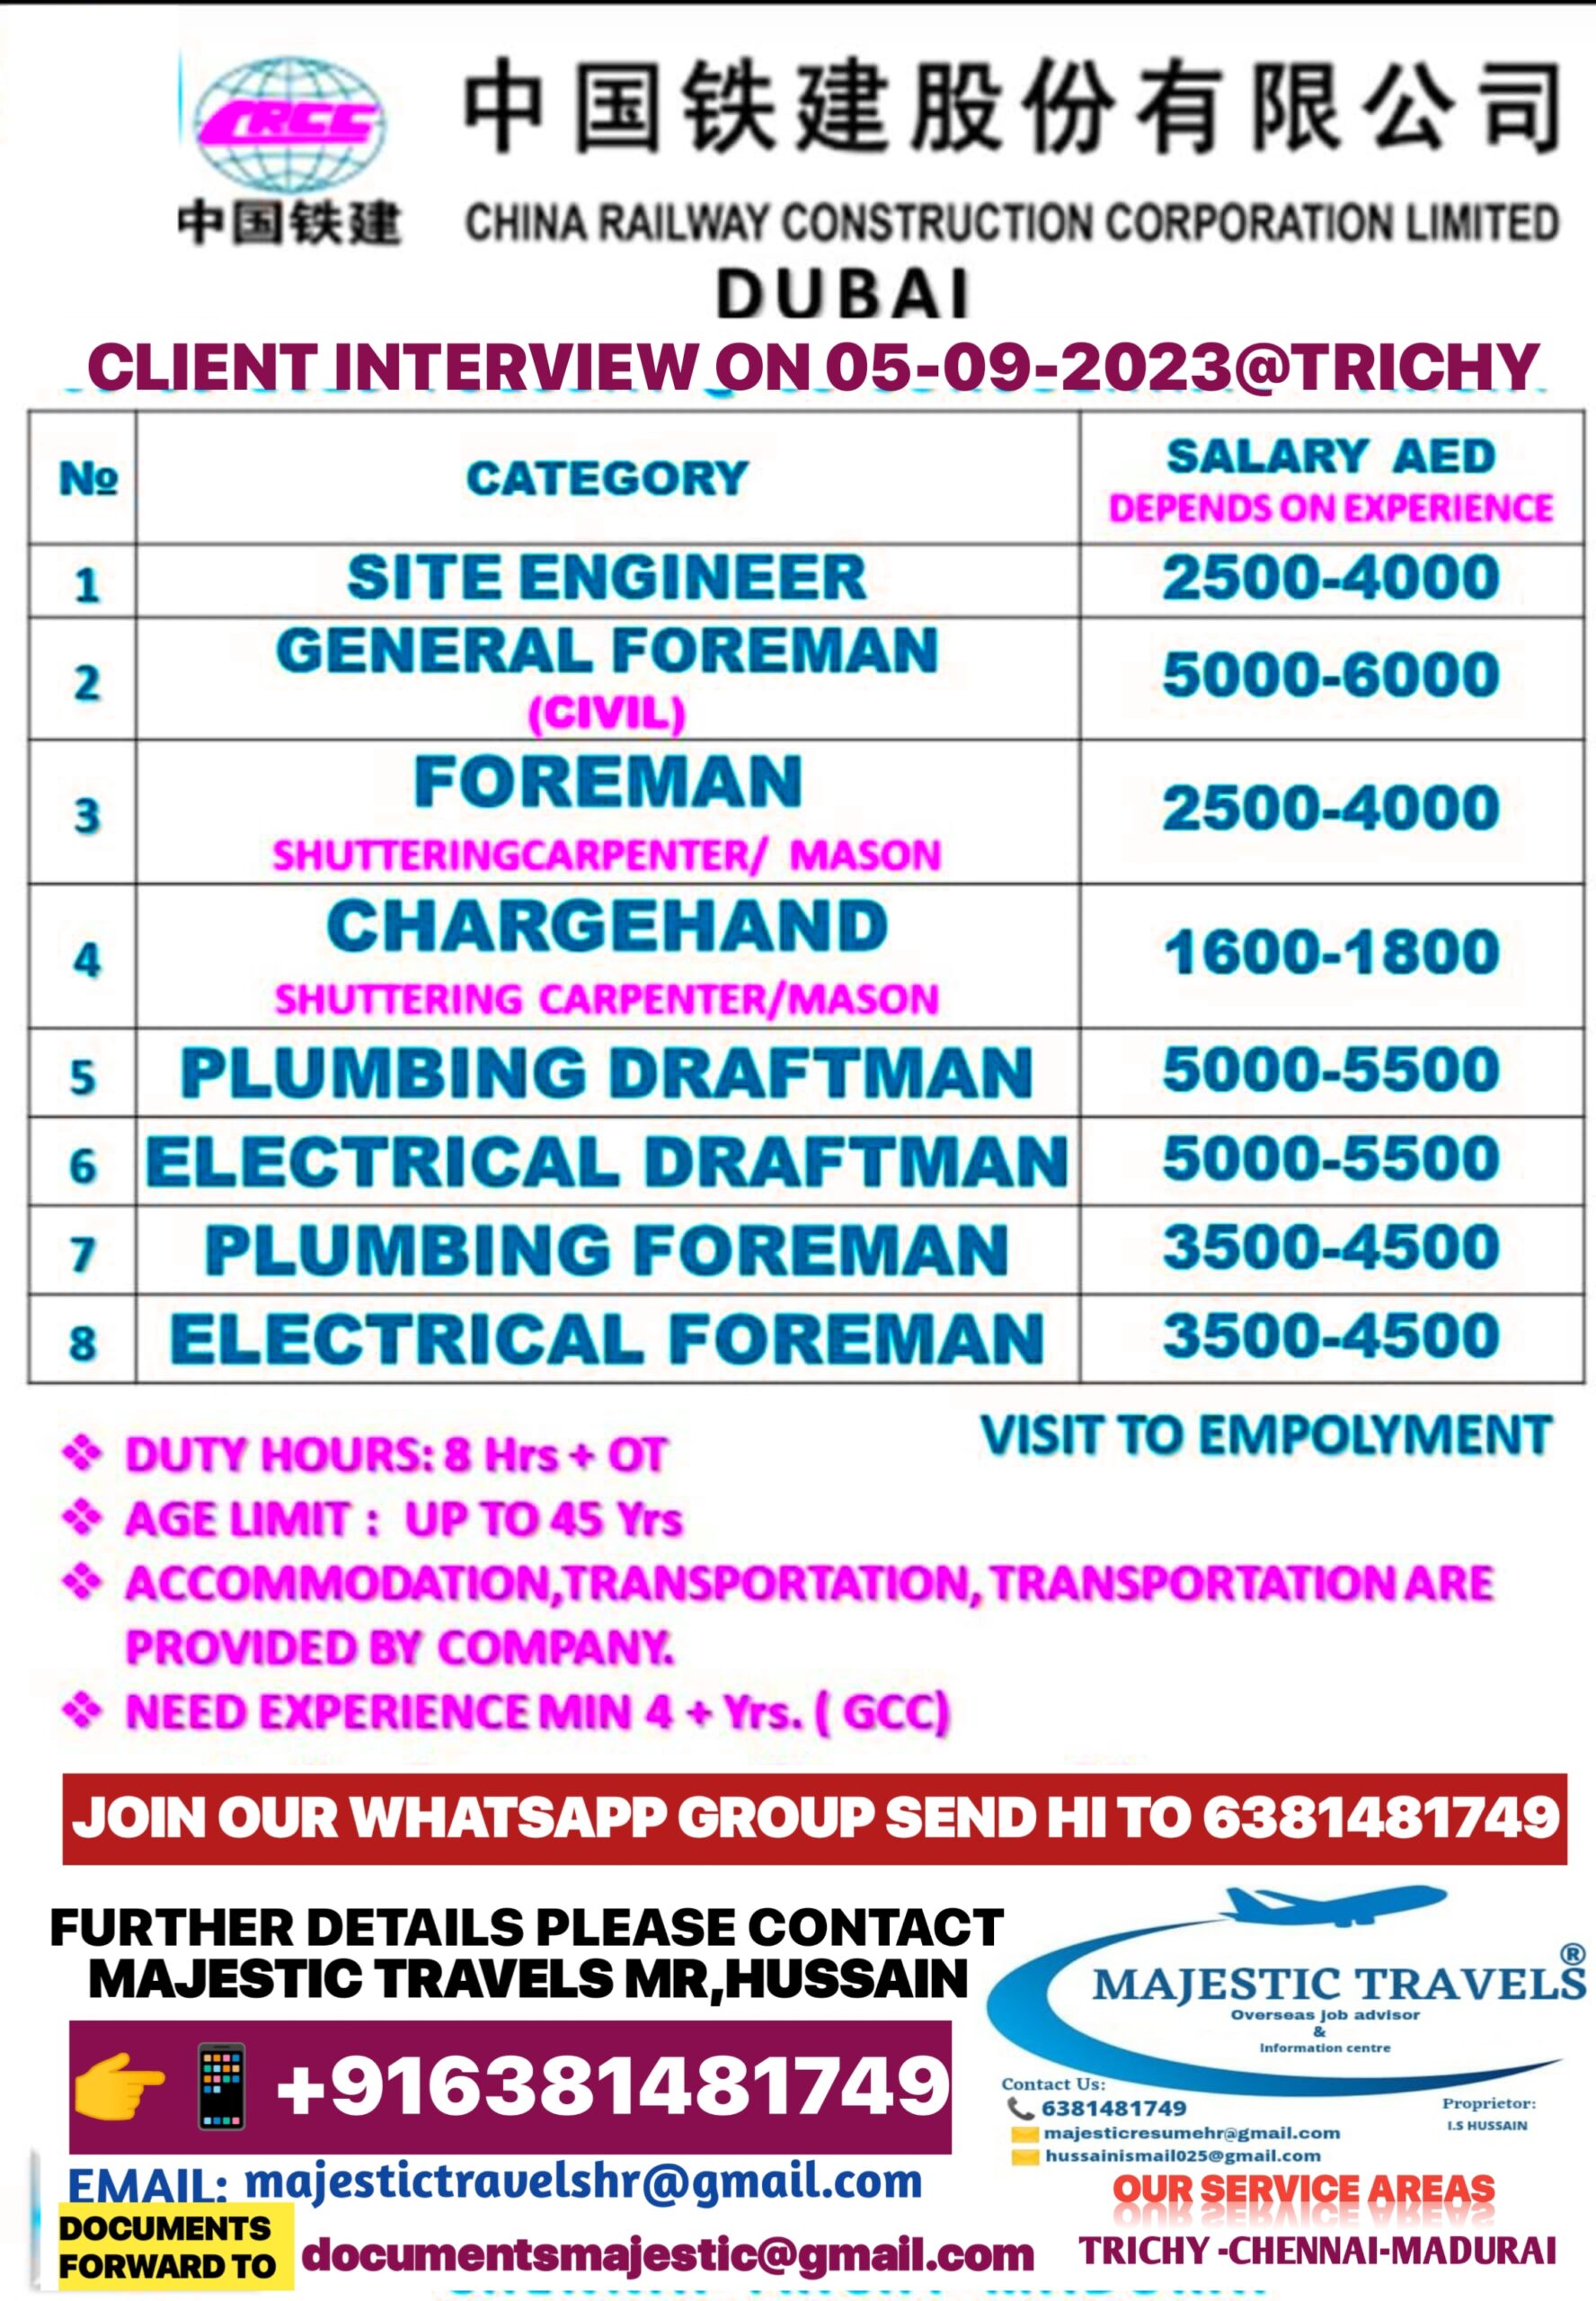 Job openings for DUBAICLIENT INTERVIEW ON 05-09-2023@TRICHY 